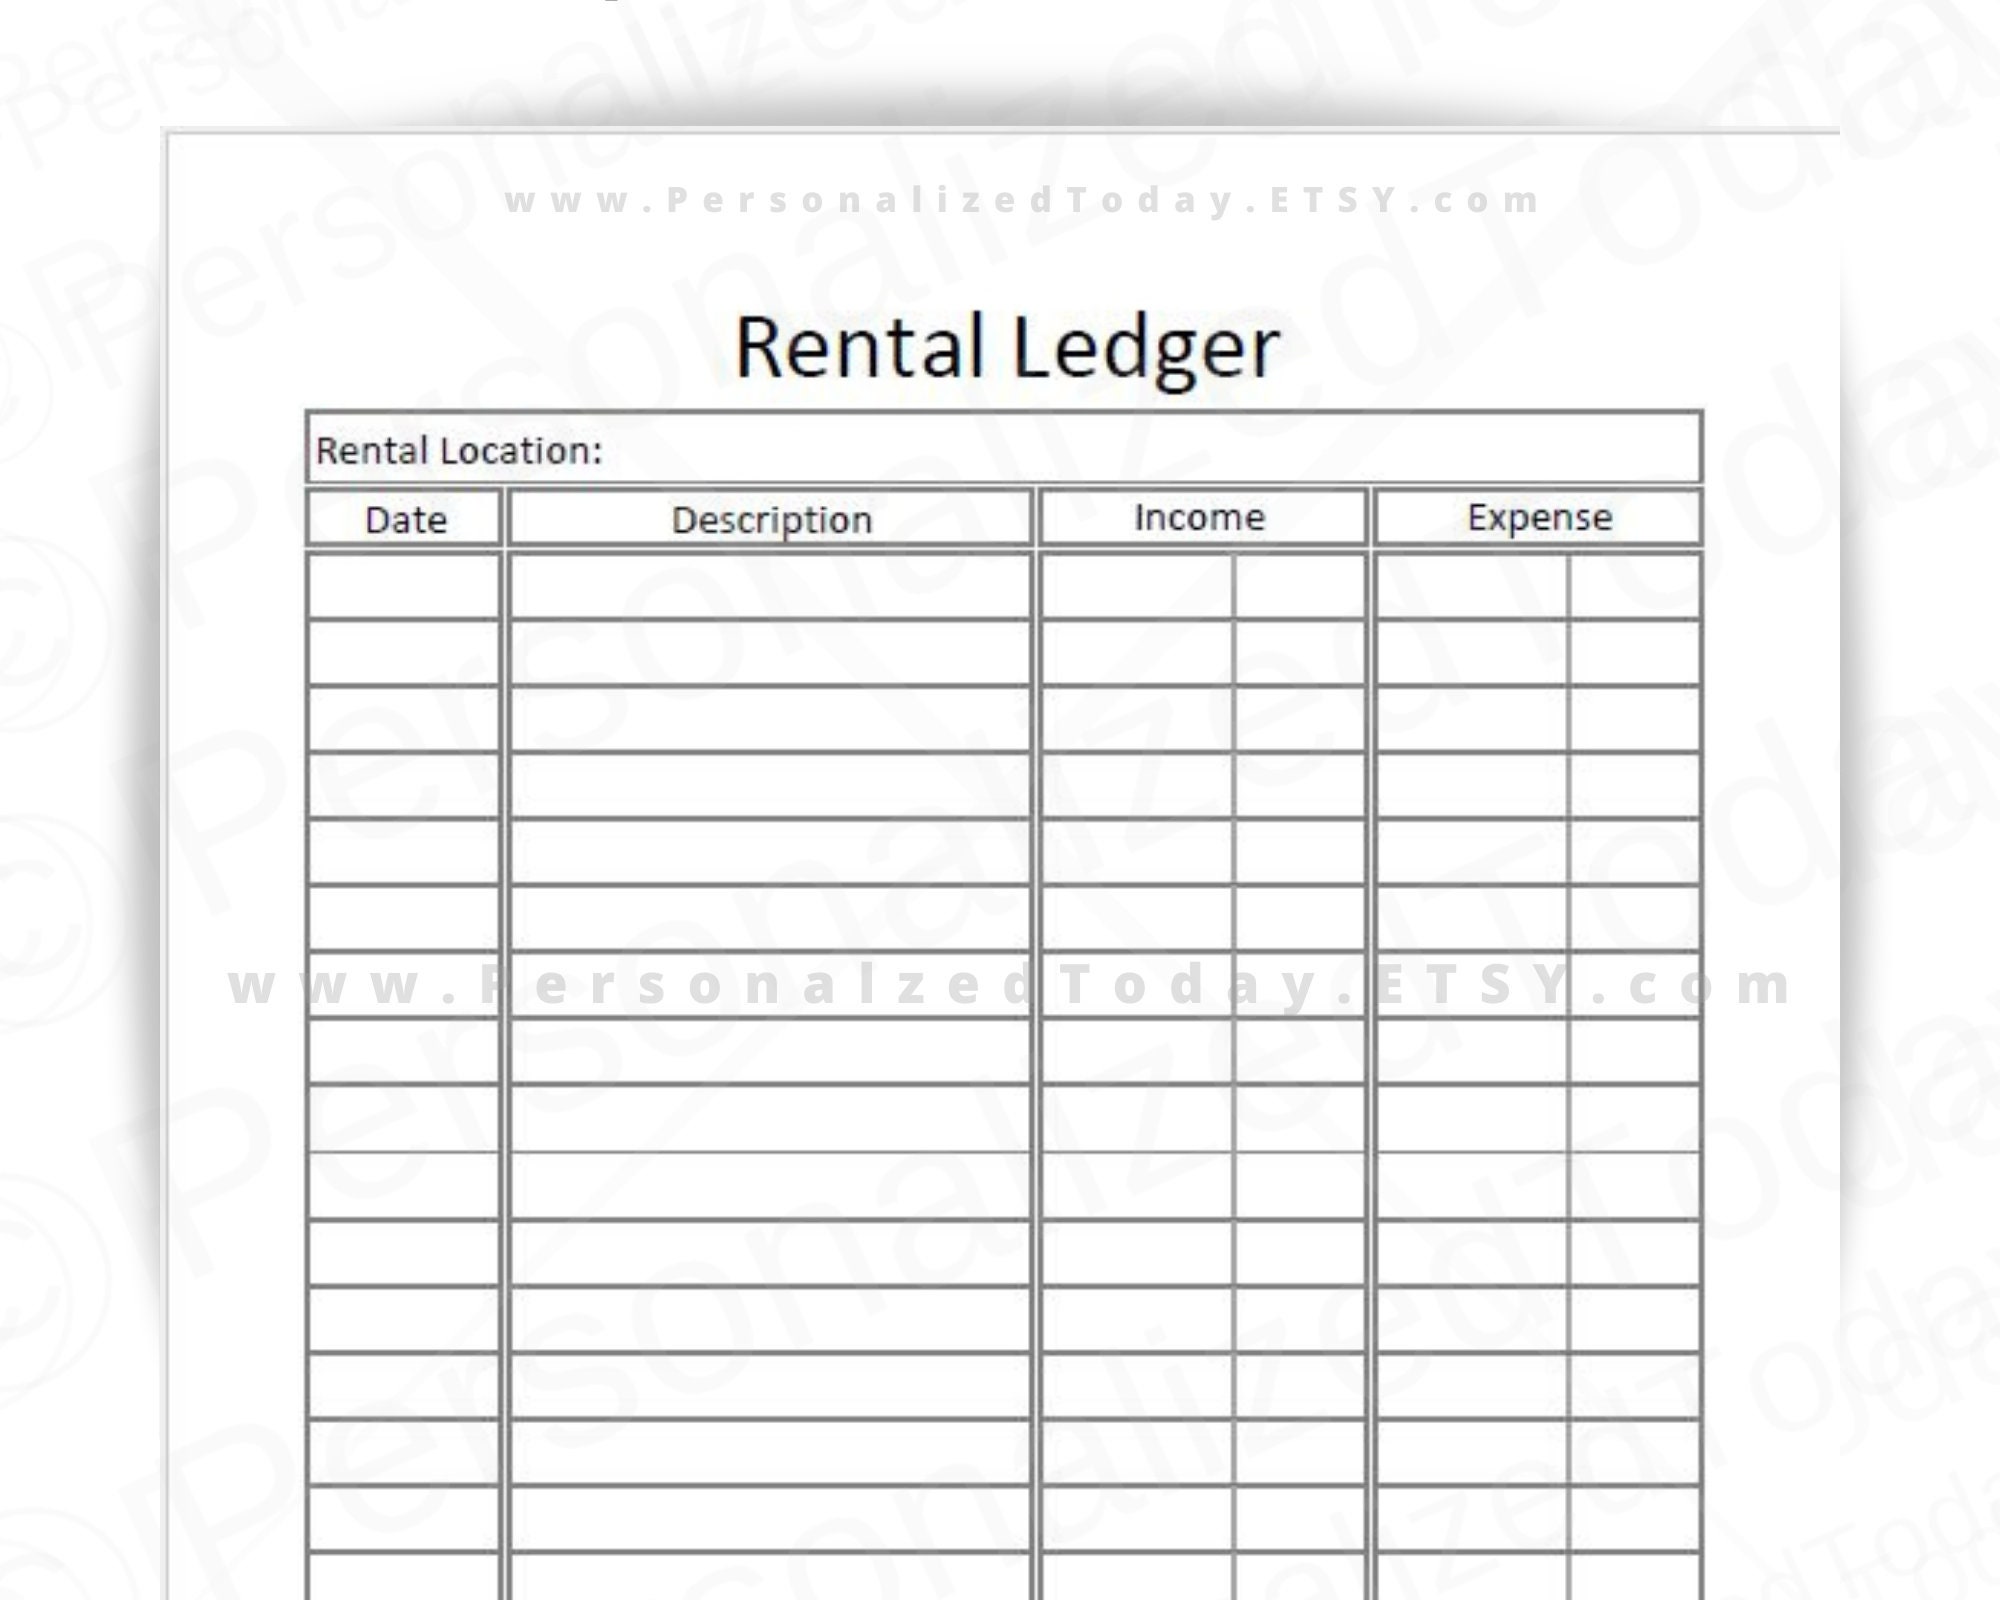 rental-ledger-why-you-should-ask-for-a-copy-the-property-market